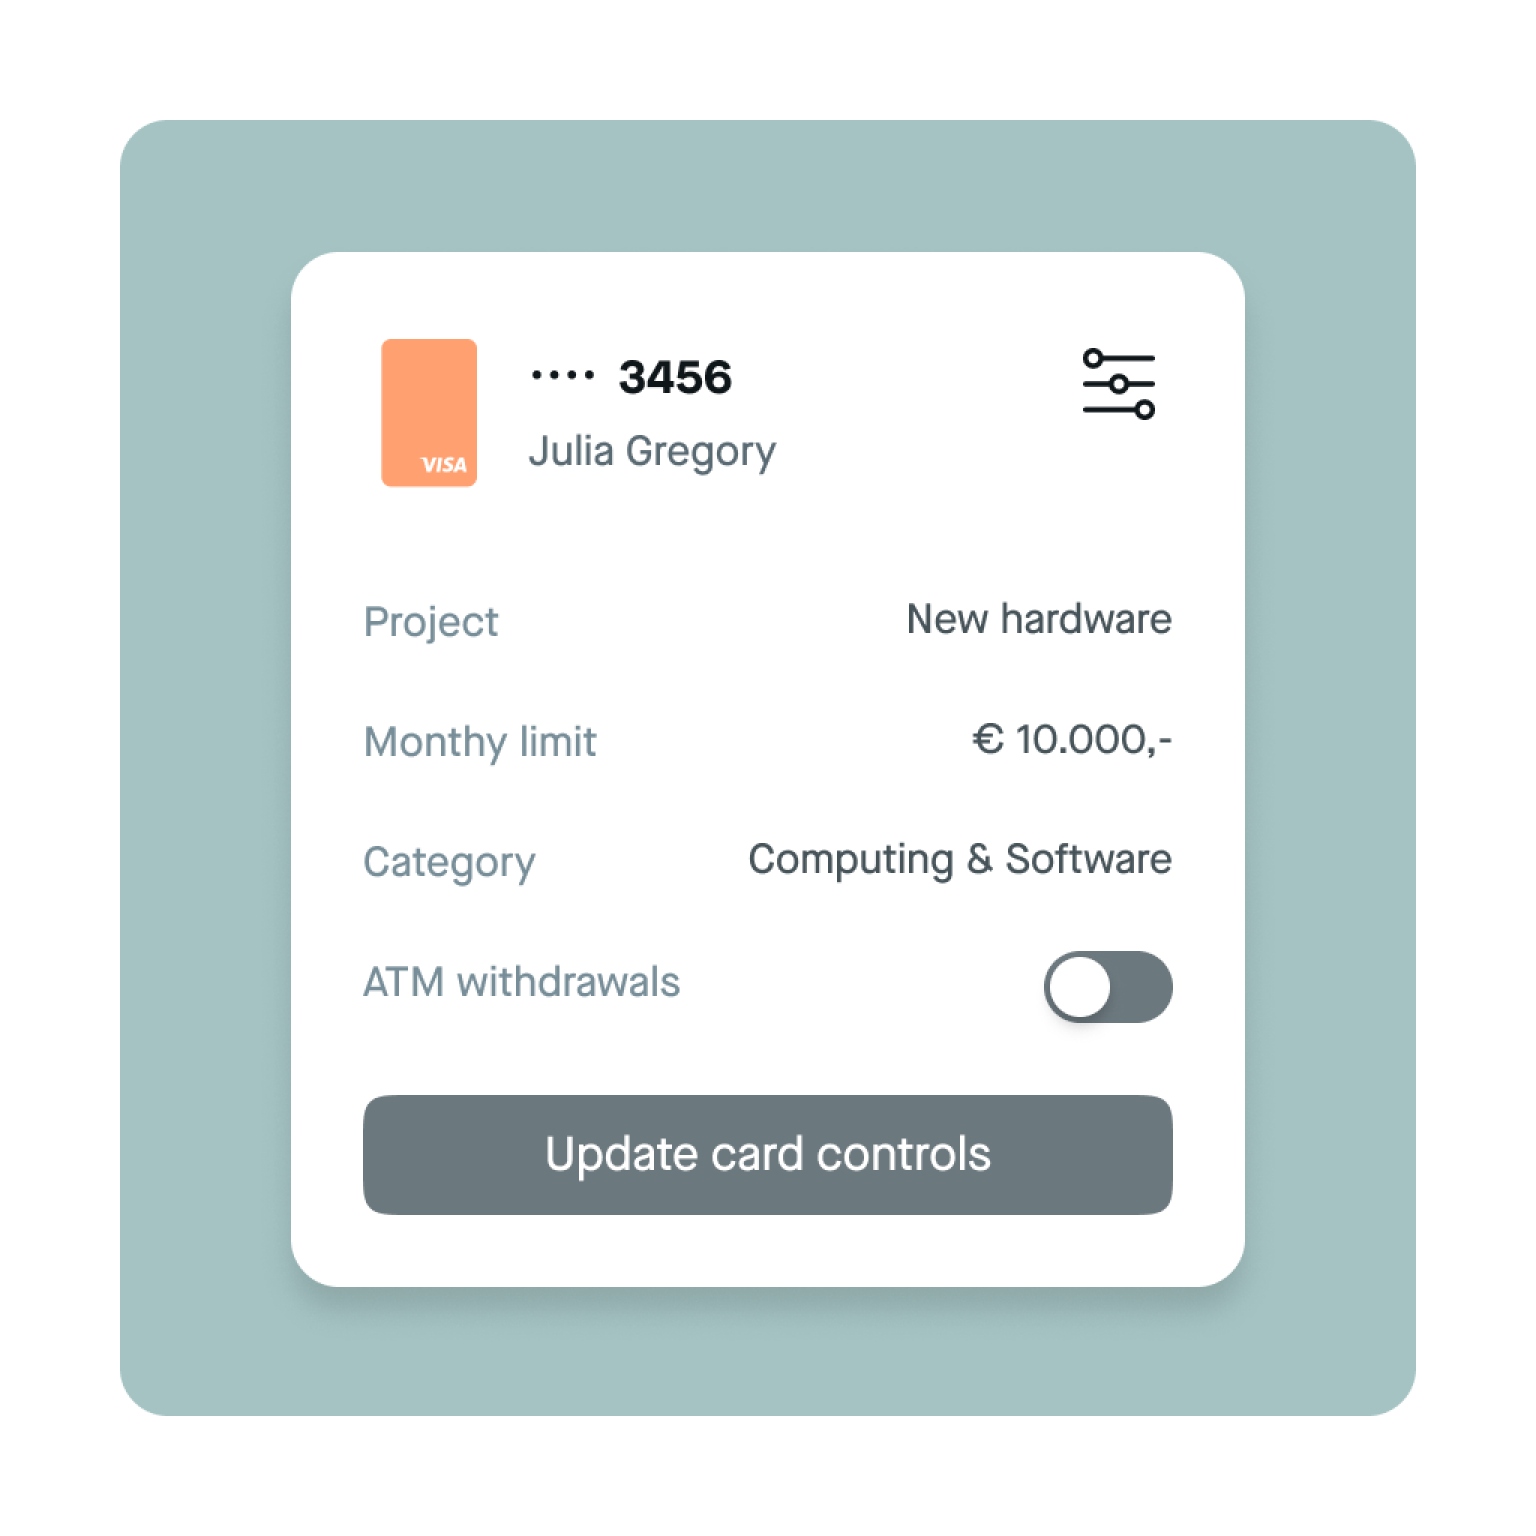 Control business credit cards with Pliant